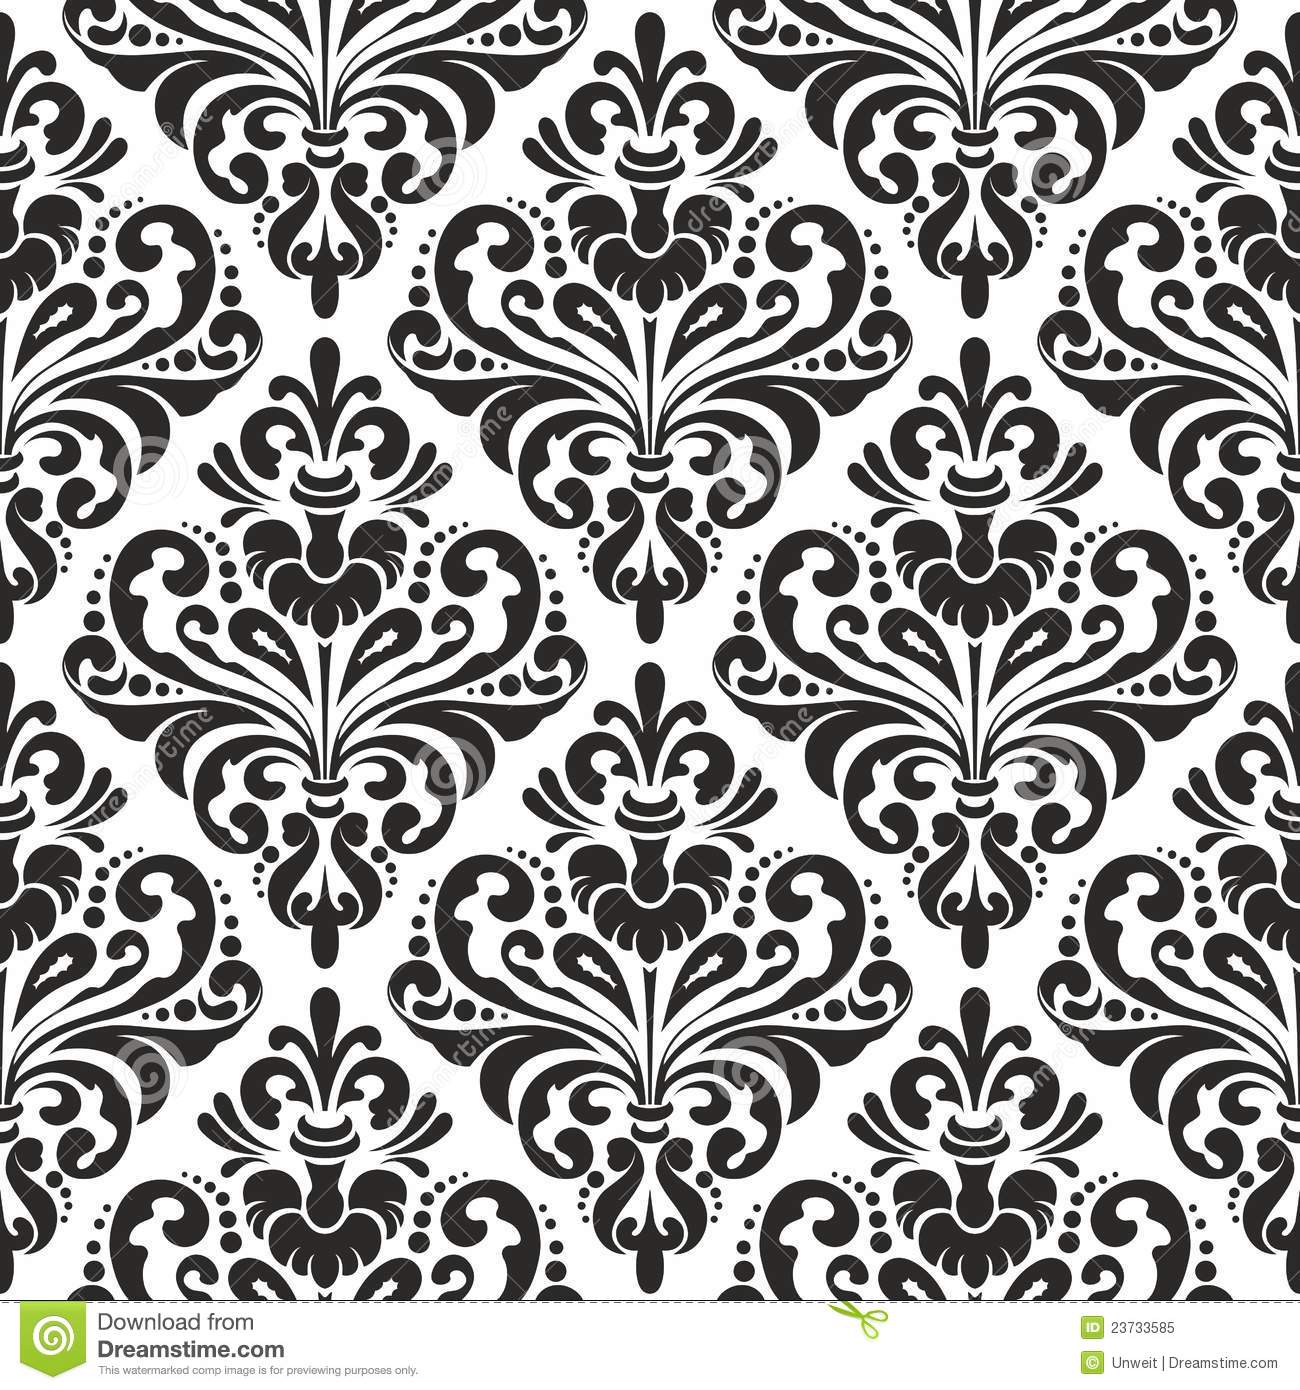 Black White Damask Wallpaper Release date Specs Review Redesign 1300x1390